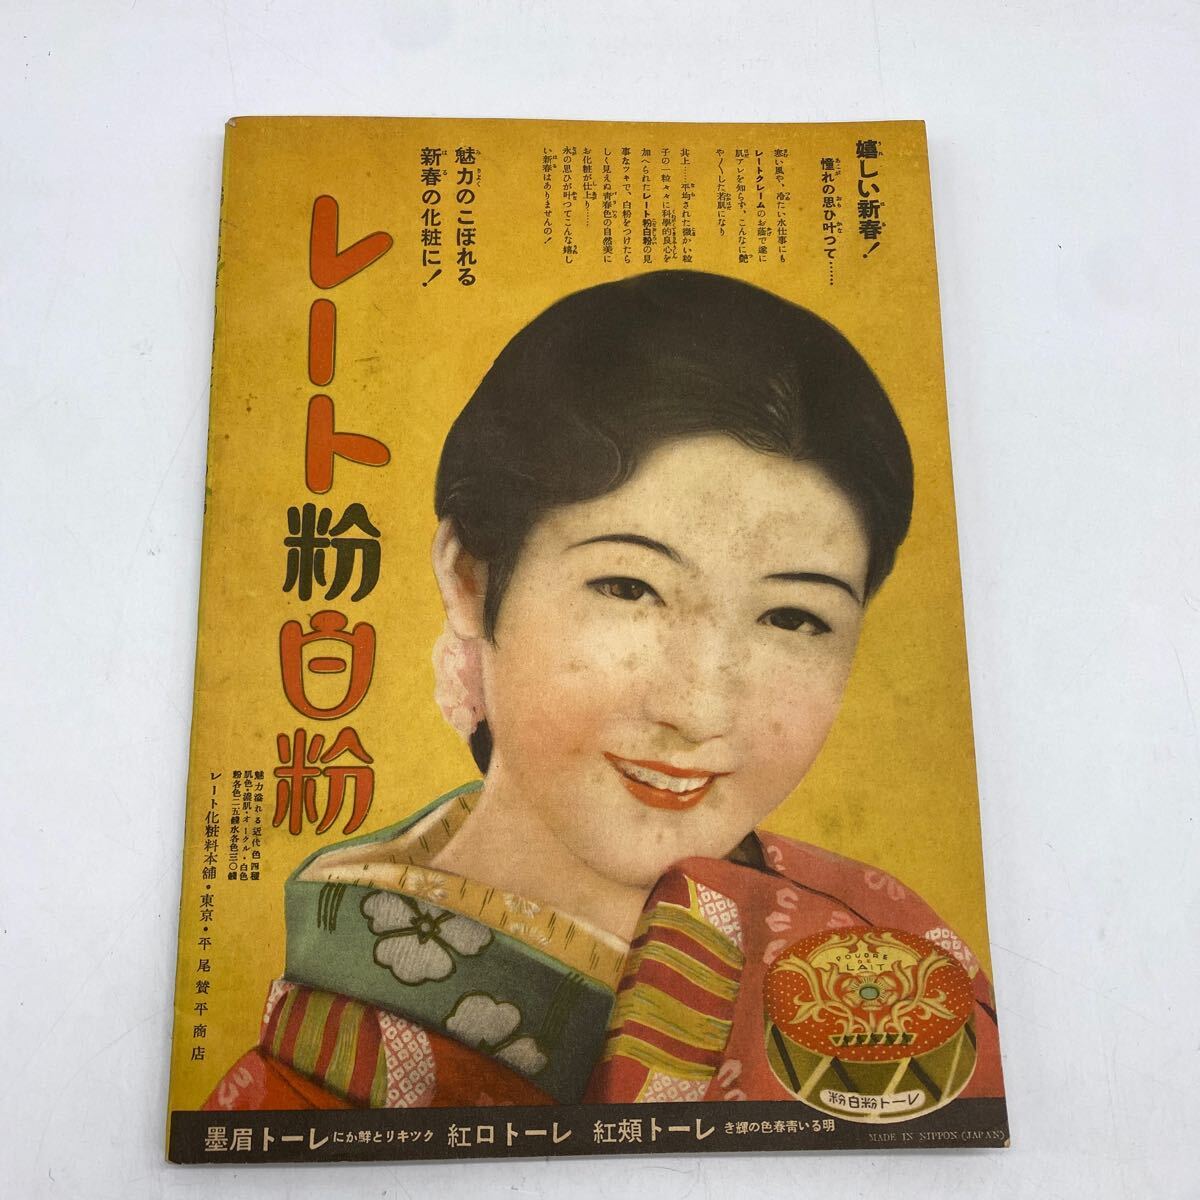 A0825 secondhand goods various . four season. . flower . tea. hot water raw . flower .. flower Showa era 12 year woman club new year number appendix 